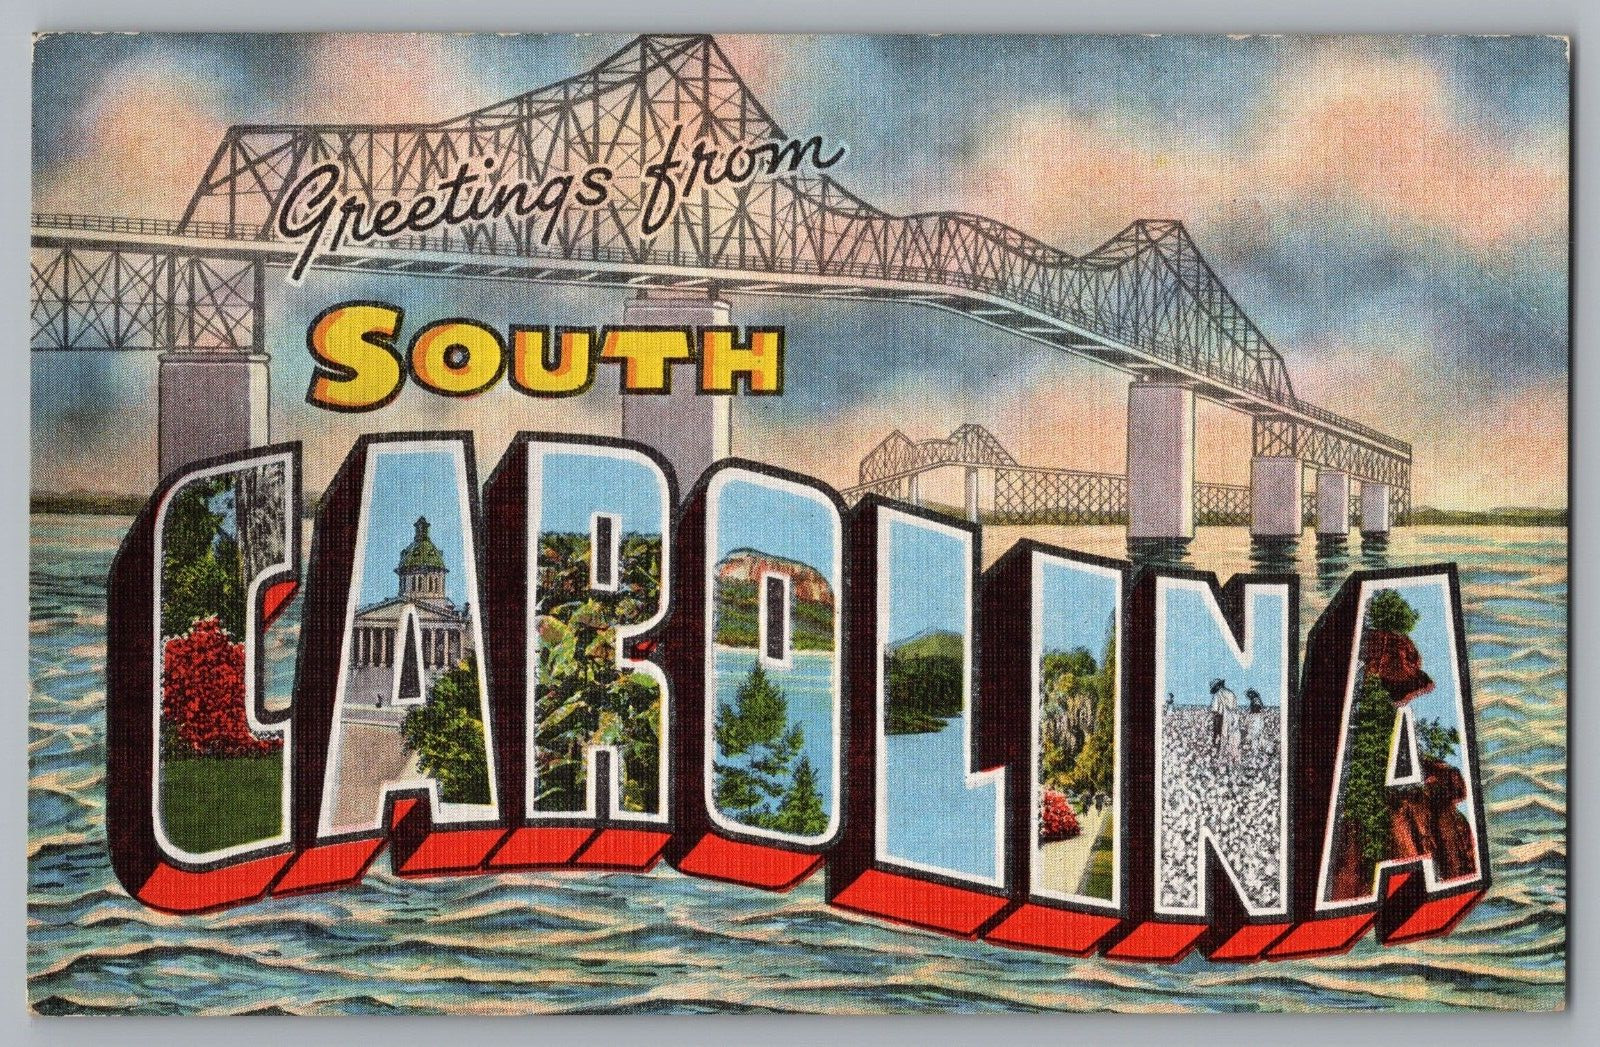 Postcard Greetings From South Carolina, Large Letter